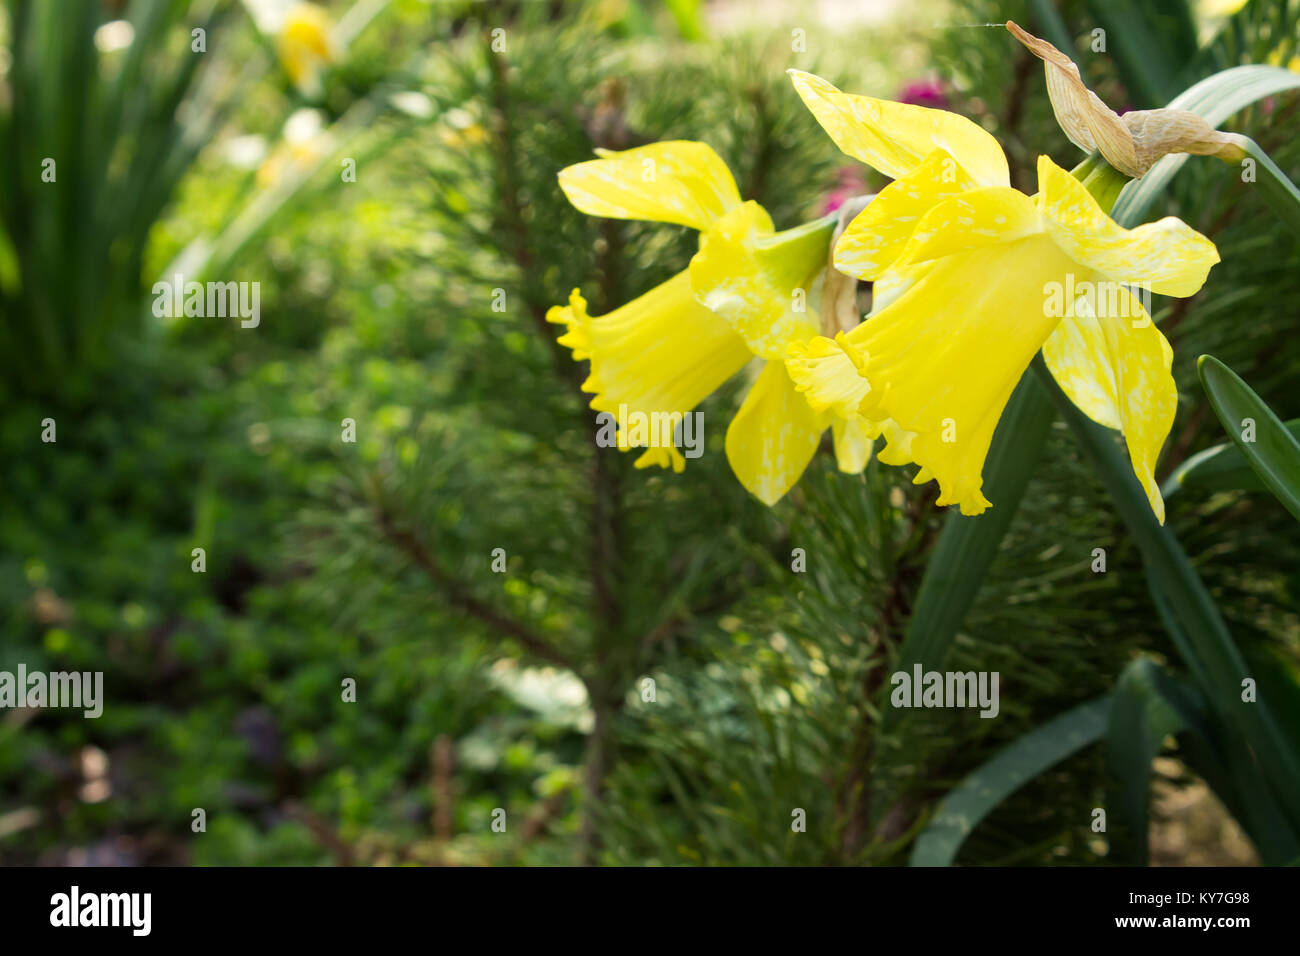 Yellow daffodil on a blurred green background. shallow depth of field. Focus on the first flower. Stock Photo